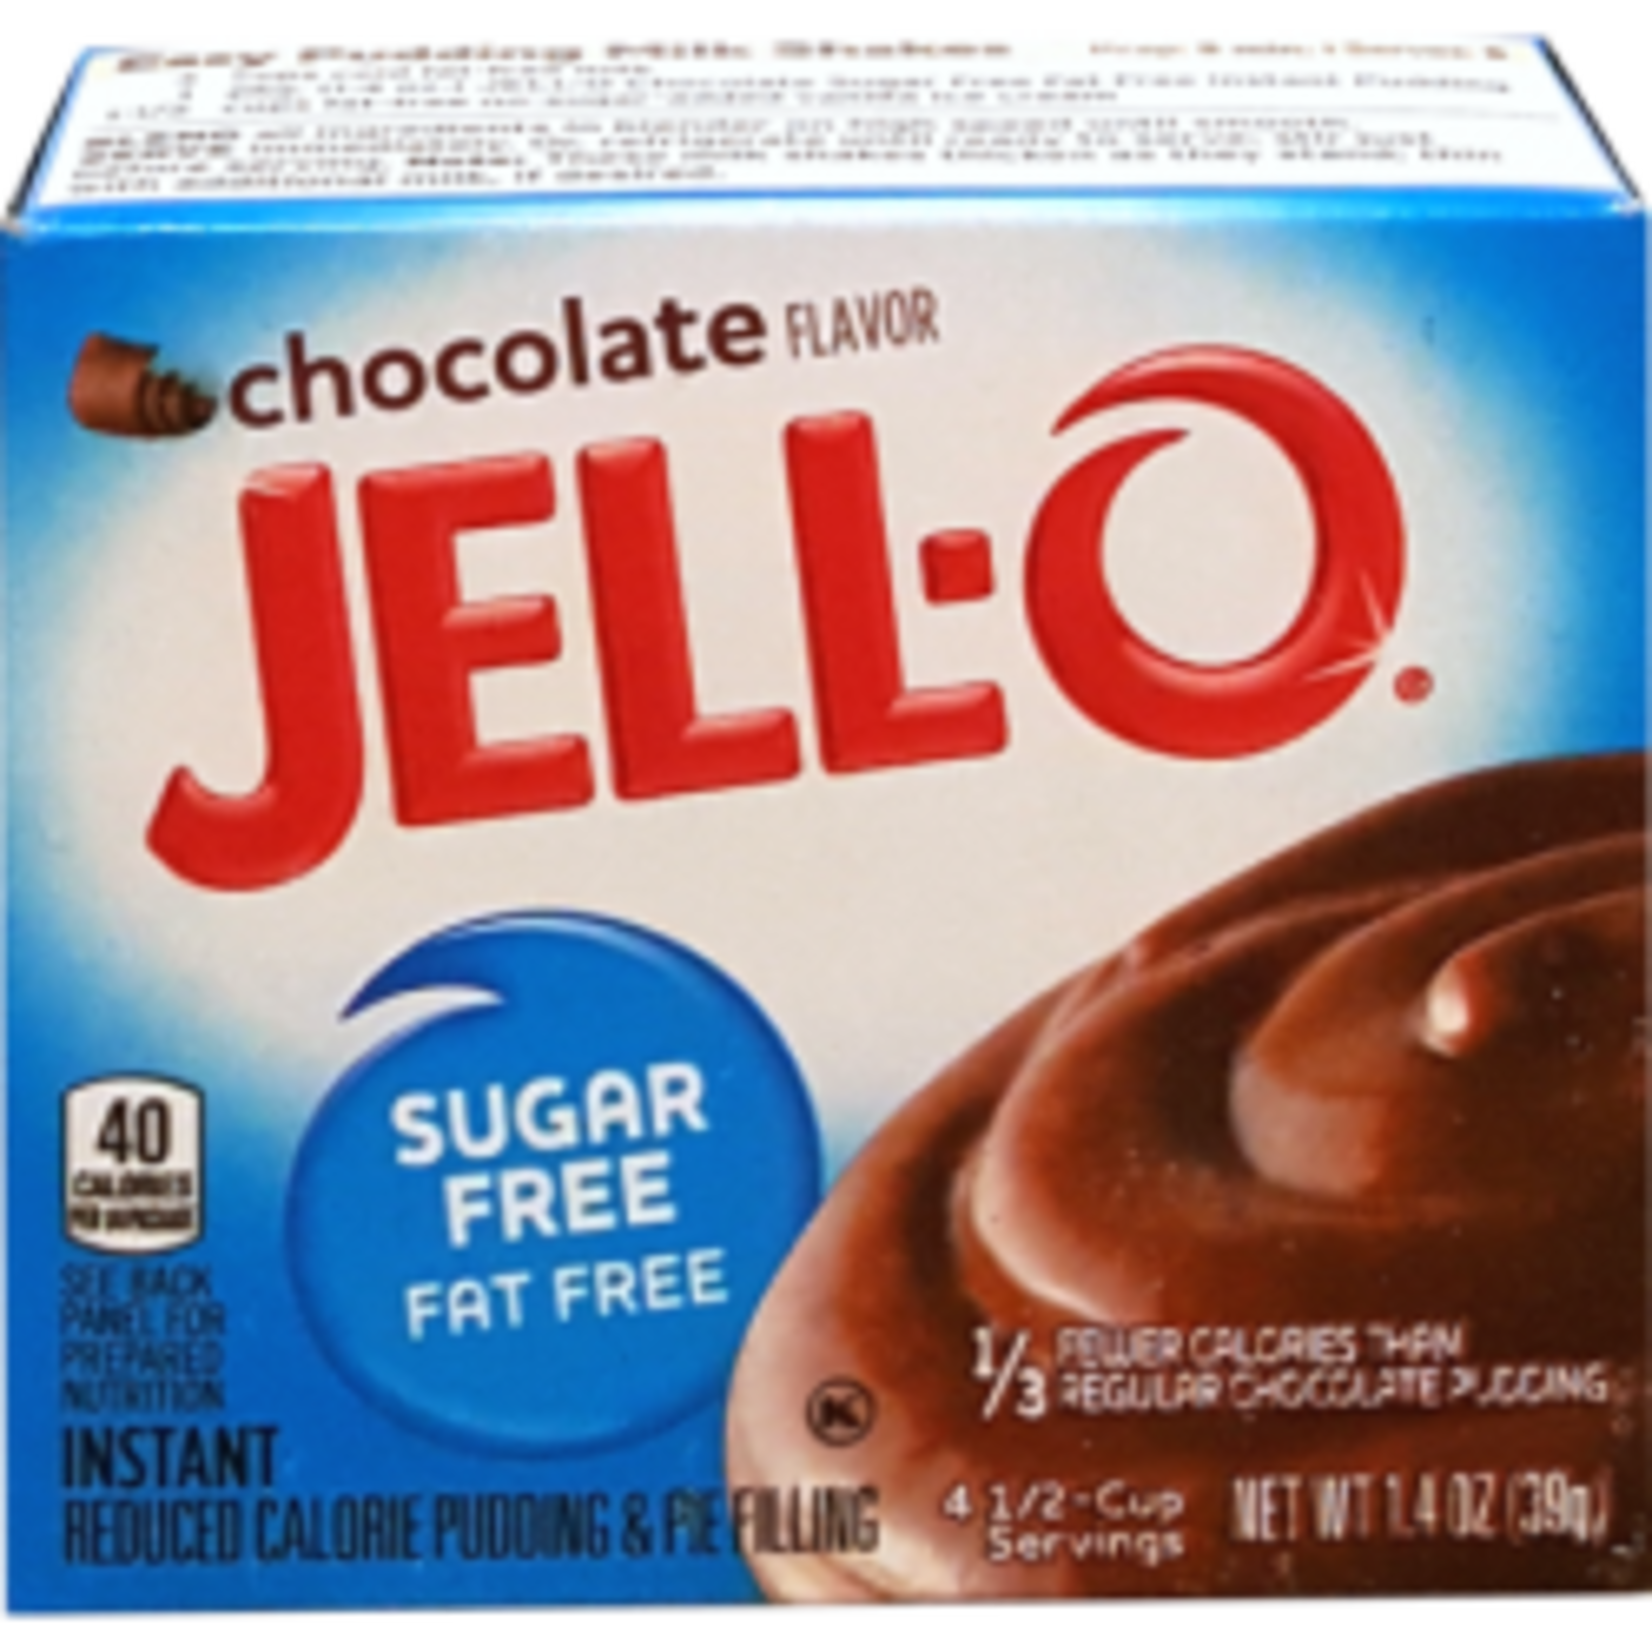 Jell-O  Chocolate Pudding & Pie Filling 39 g